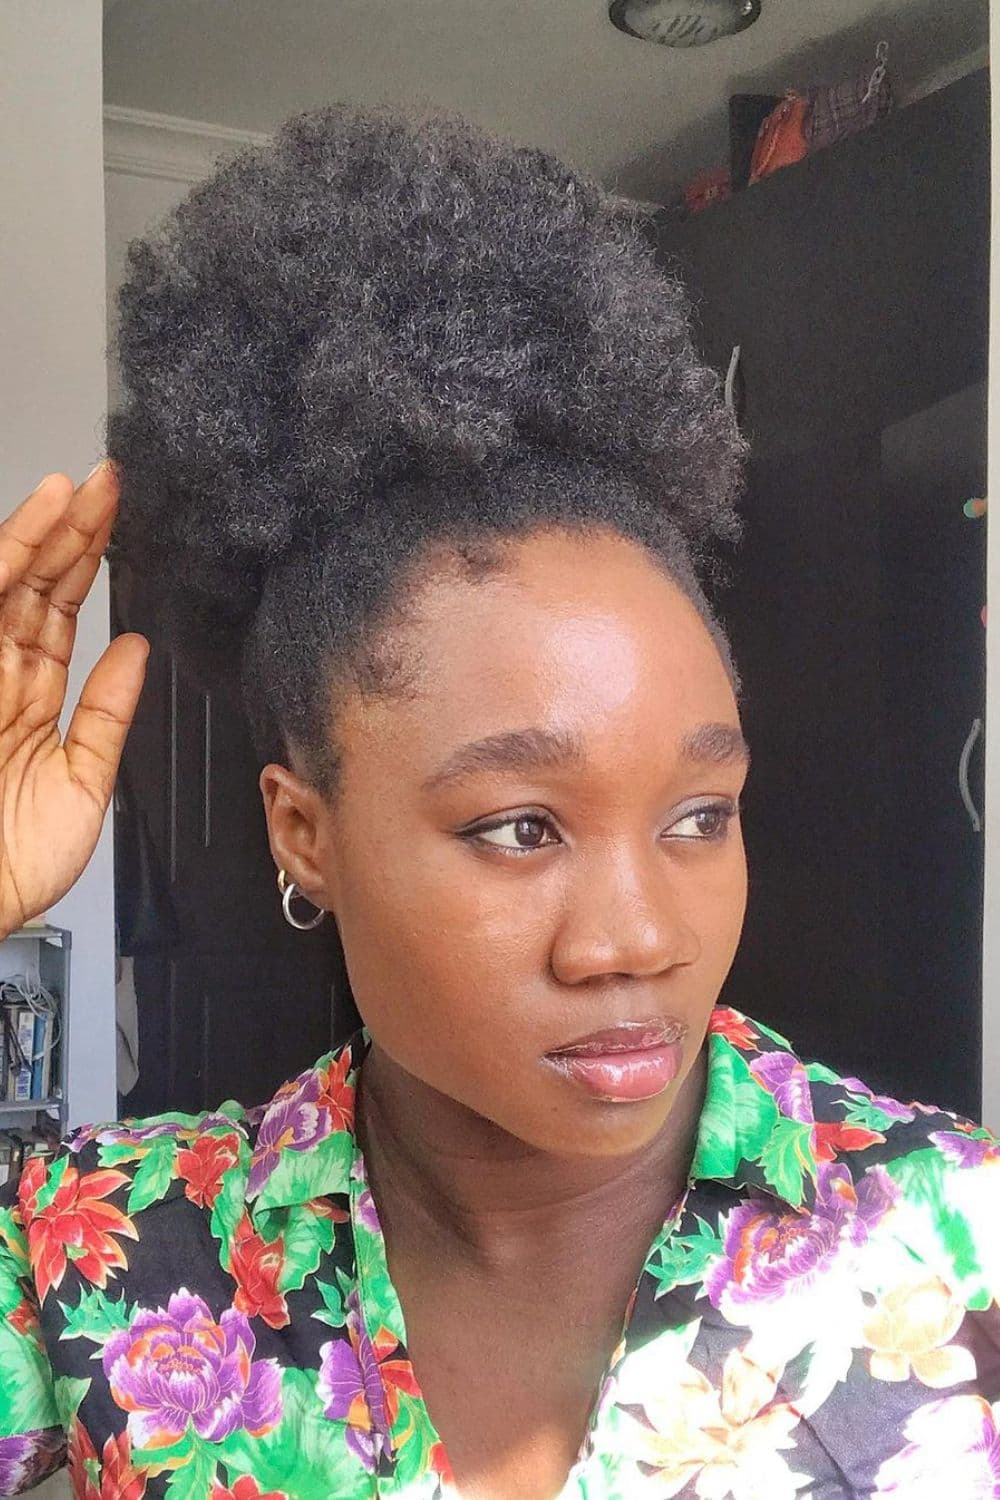 Woman with a floral polo shirt in a high puff hairstyle.